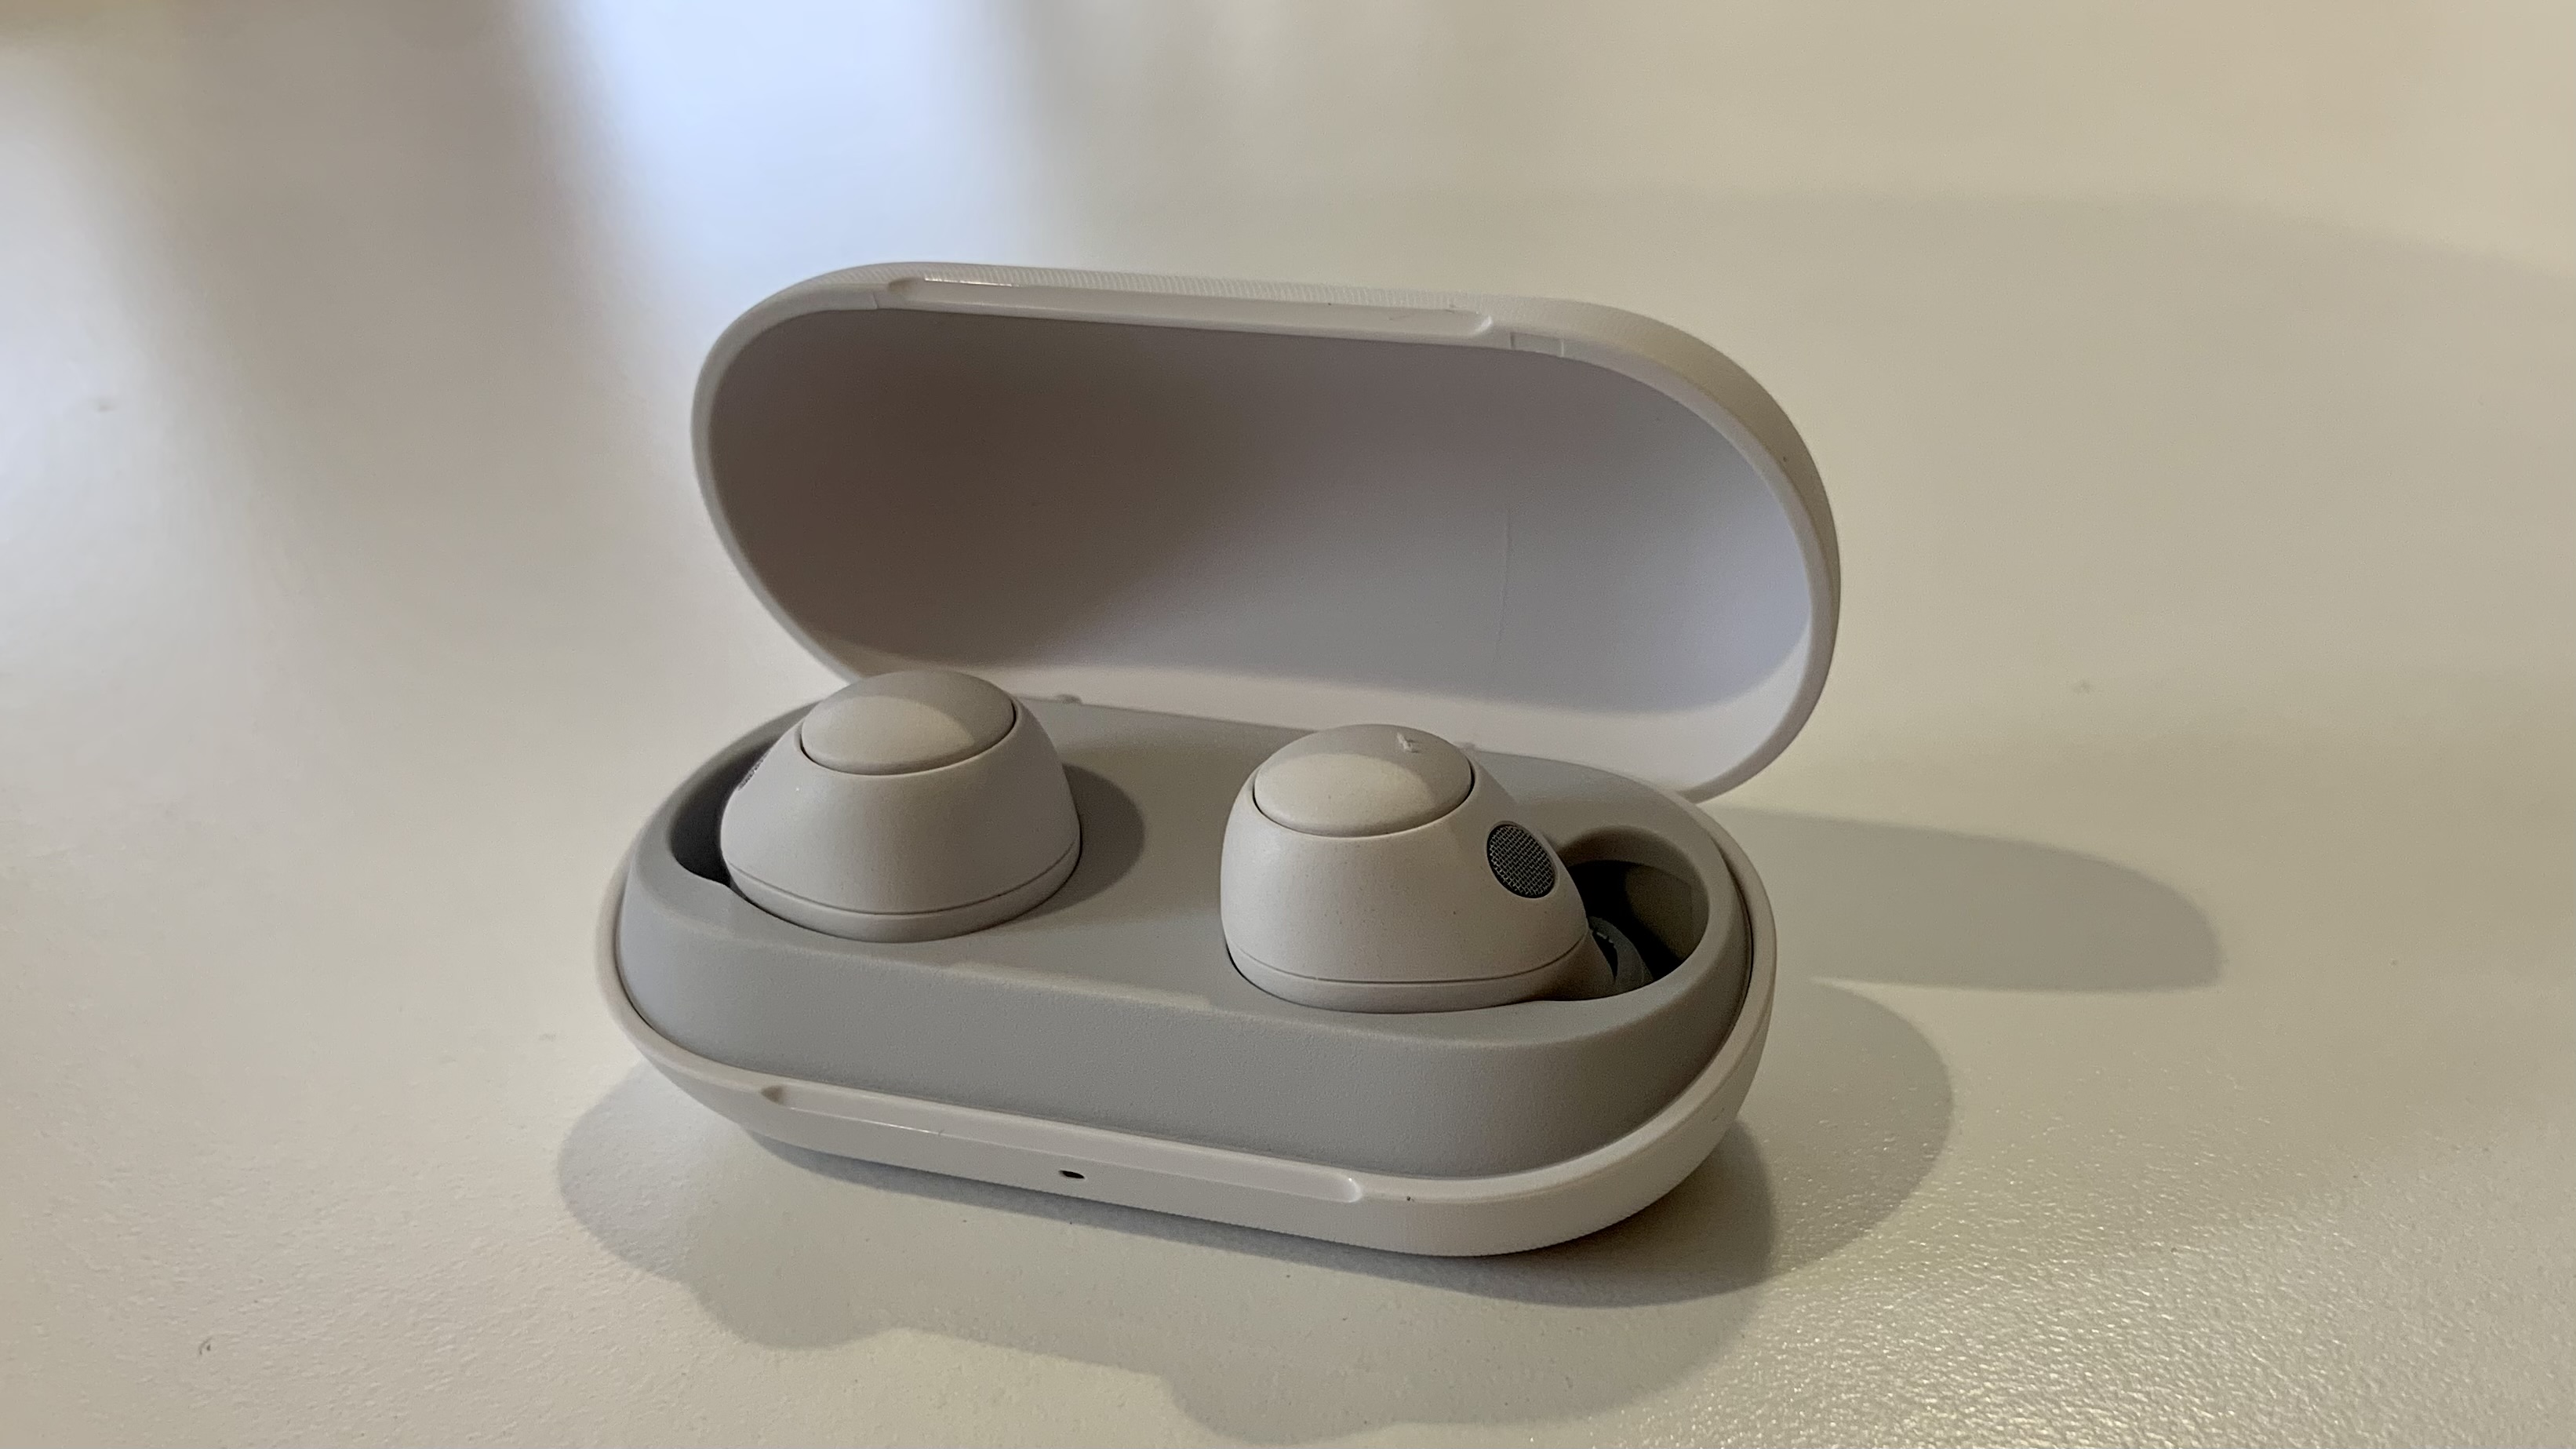 Sony WF-C700N earbuds in their case, on white background